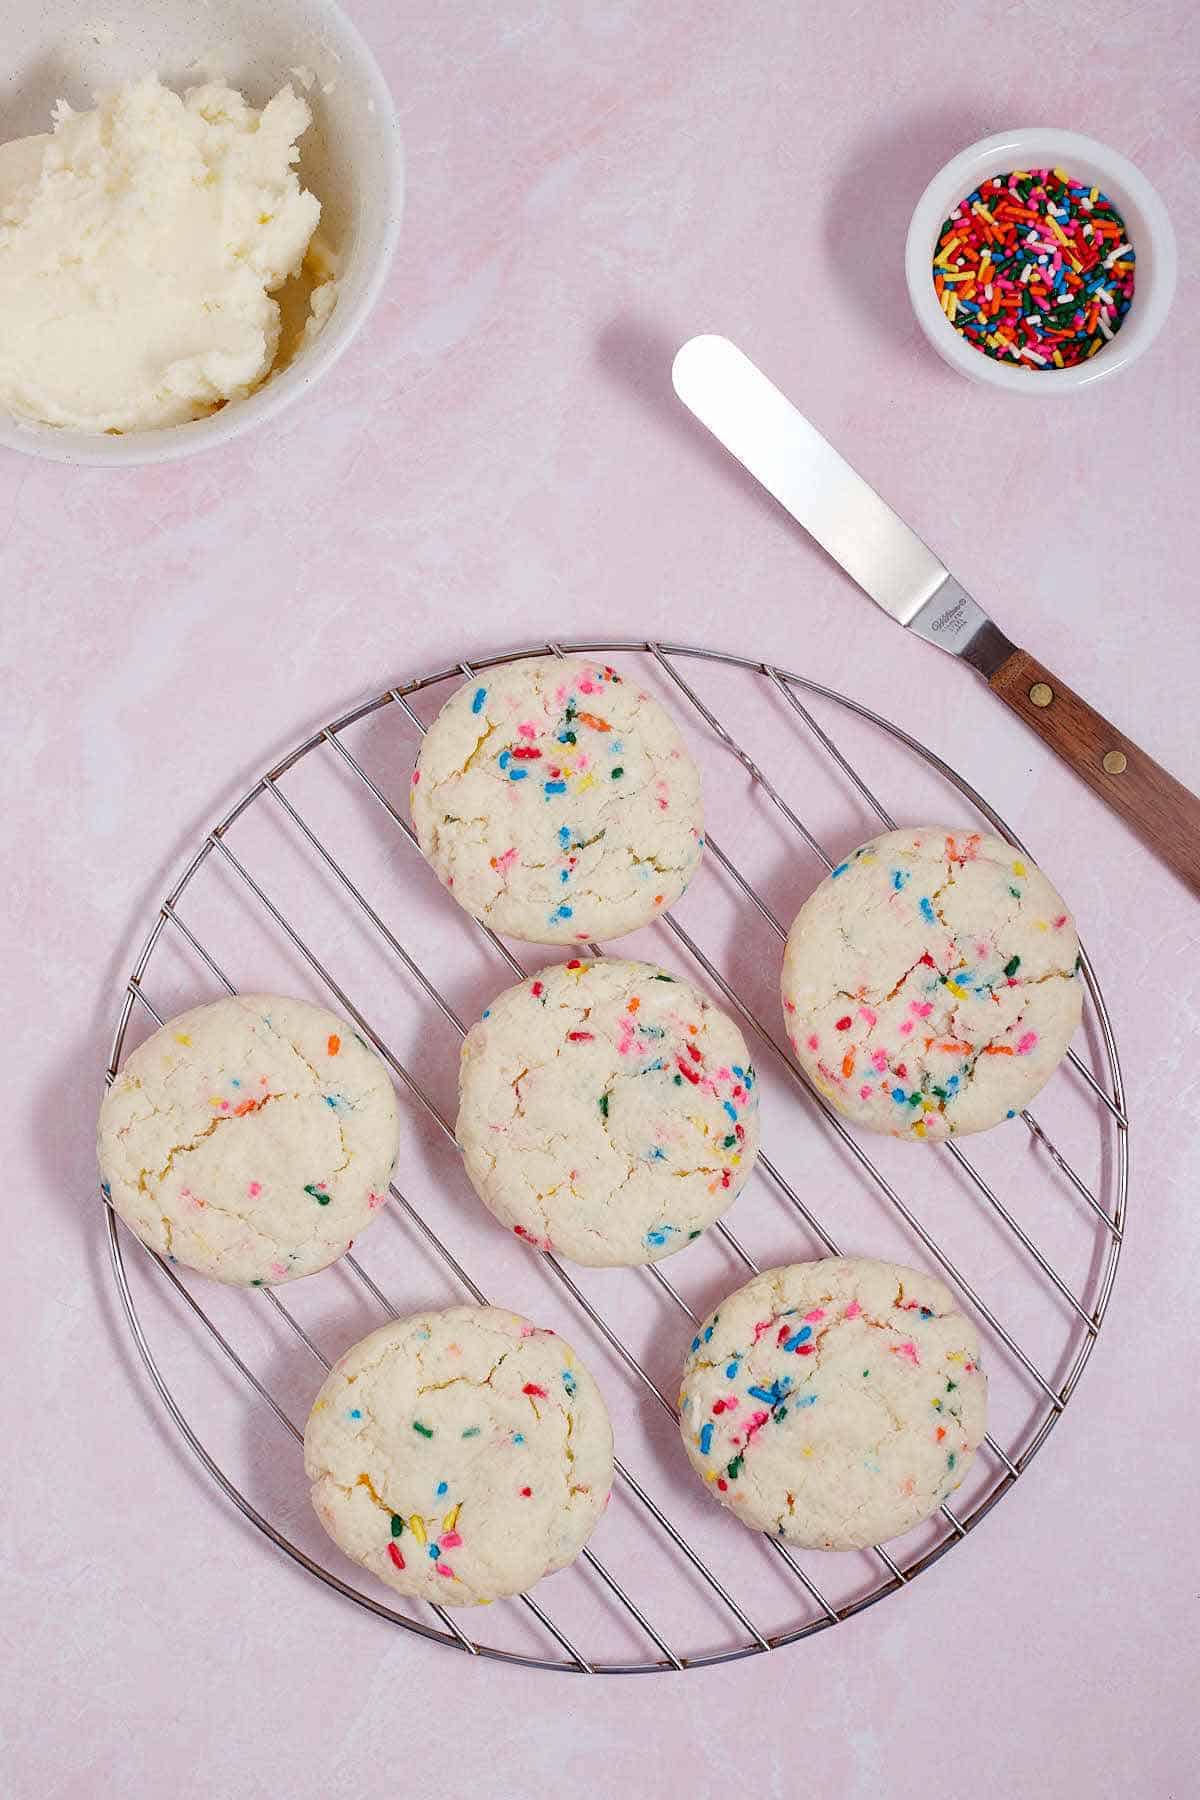 Funfetti cookies cooling on a wire rack.